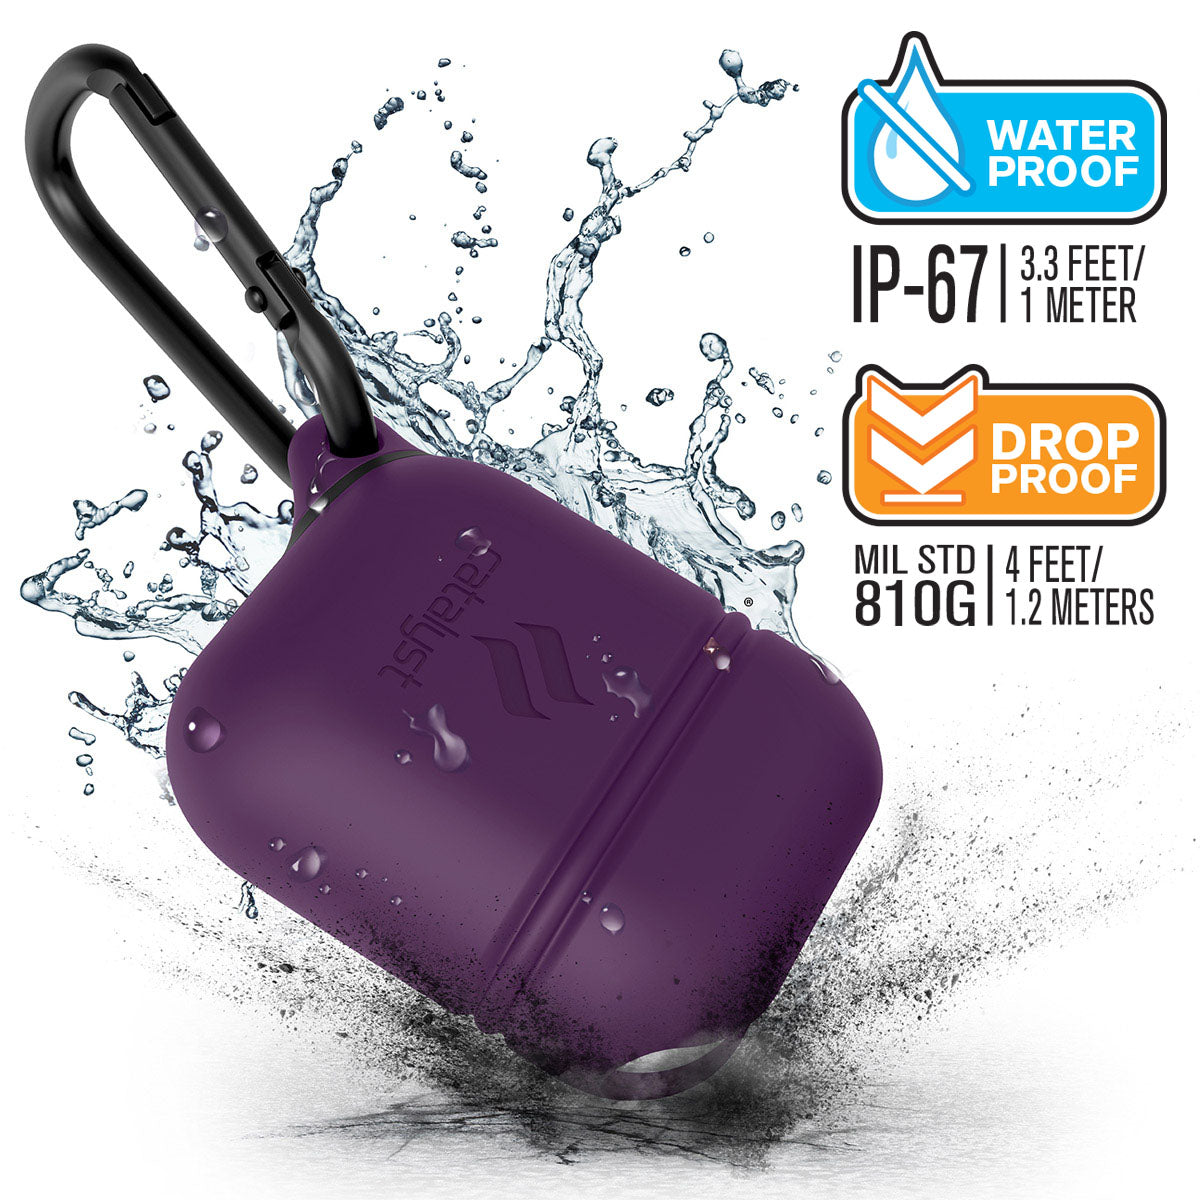 CATAPDPPL | Catalyst airpods gen2/1 waterproof case + carabiner showing the case drop proof and water proof features with attached carabiner in deep plum text reads 7 3.3 FEET/1 METER DROP PROOF MIL STD 810G 1.2 METERS